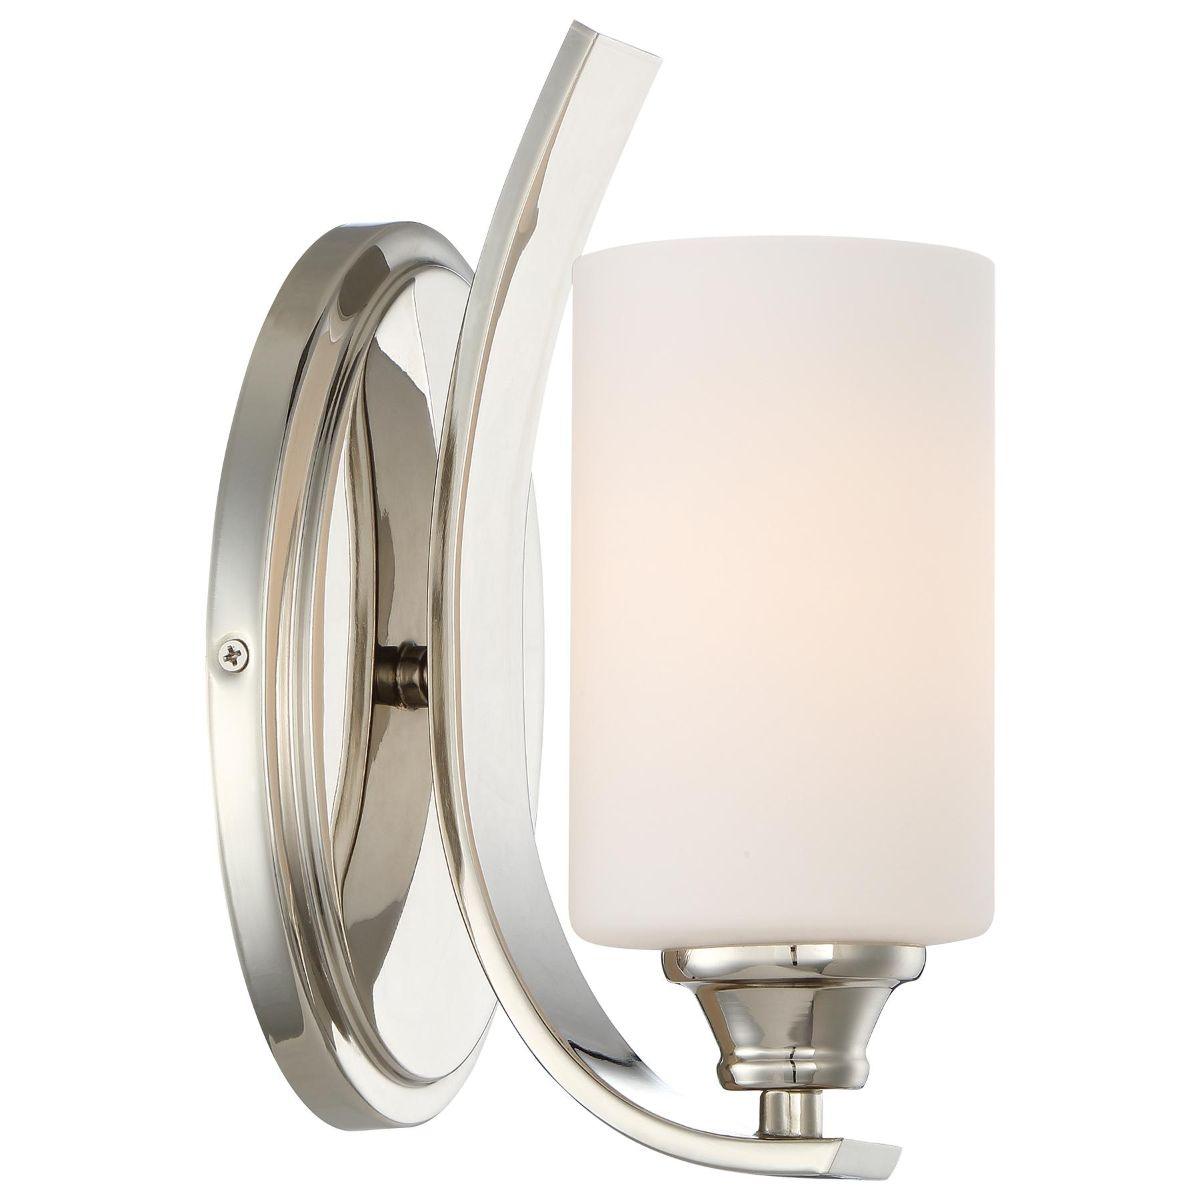 Tilbury 10 in. Wall Sconce Polished Nickel finish